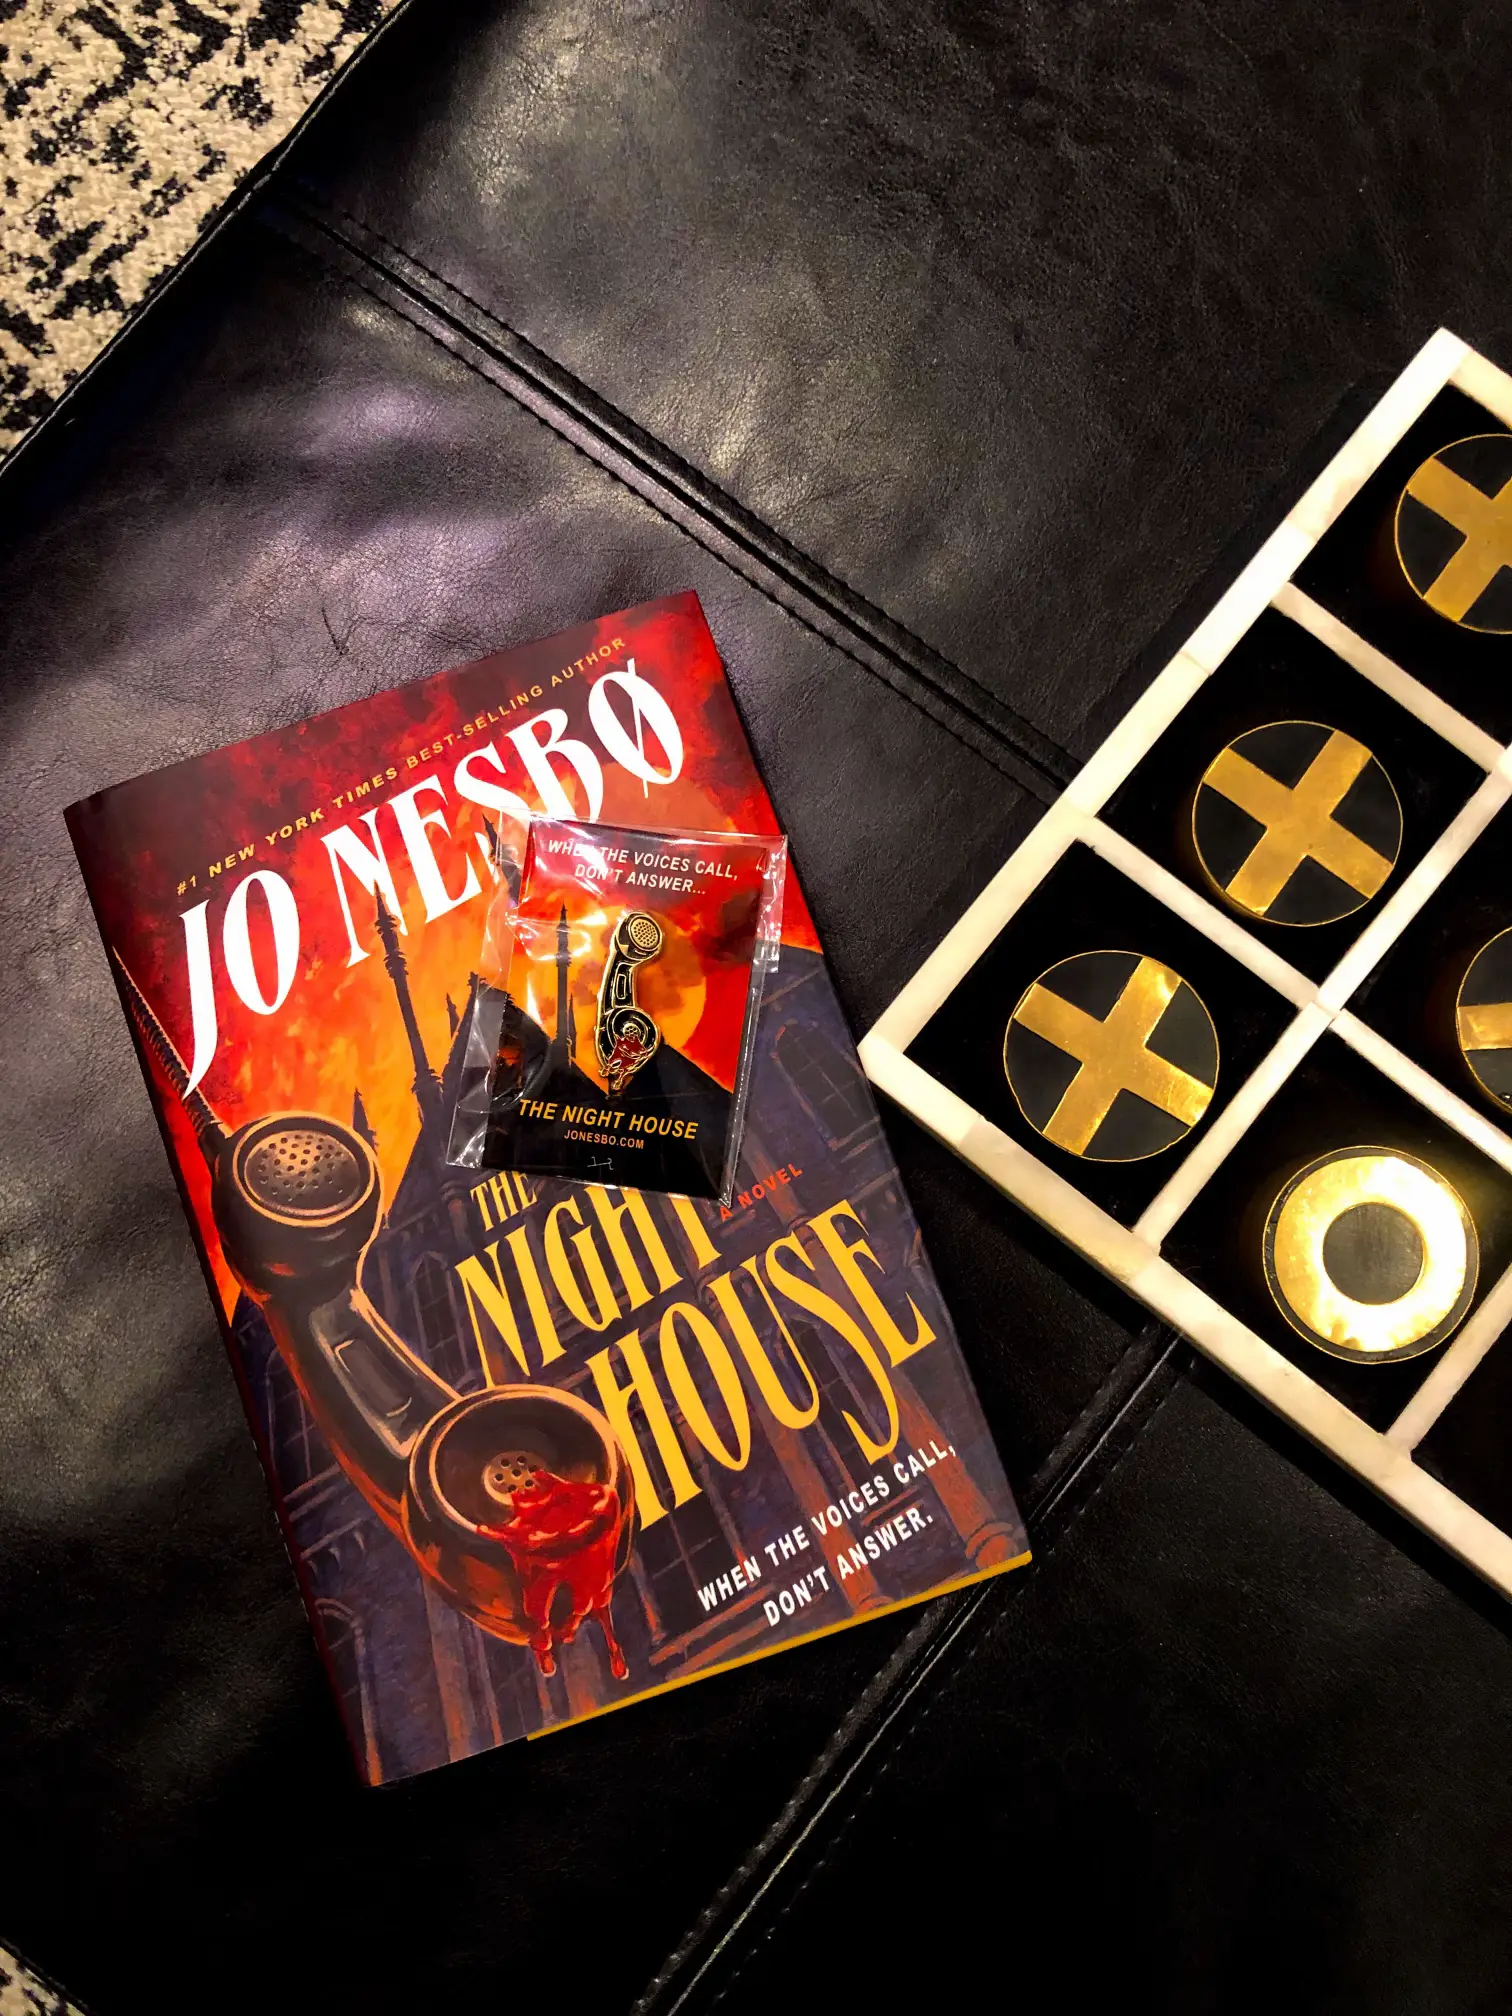 Bestselling Author Jo Nesbo Answers The Call With New Horror Novel